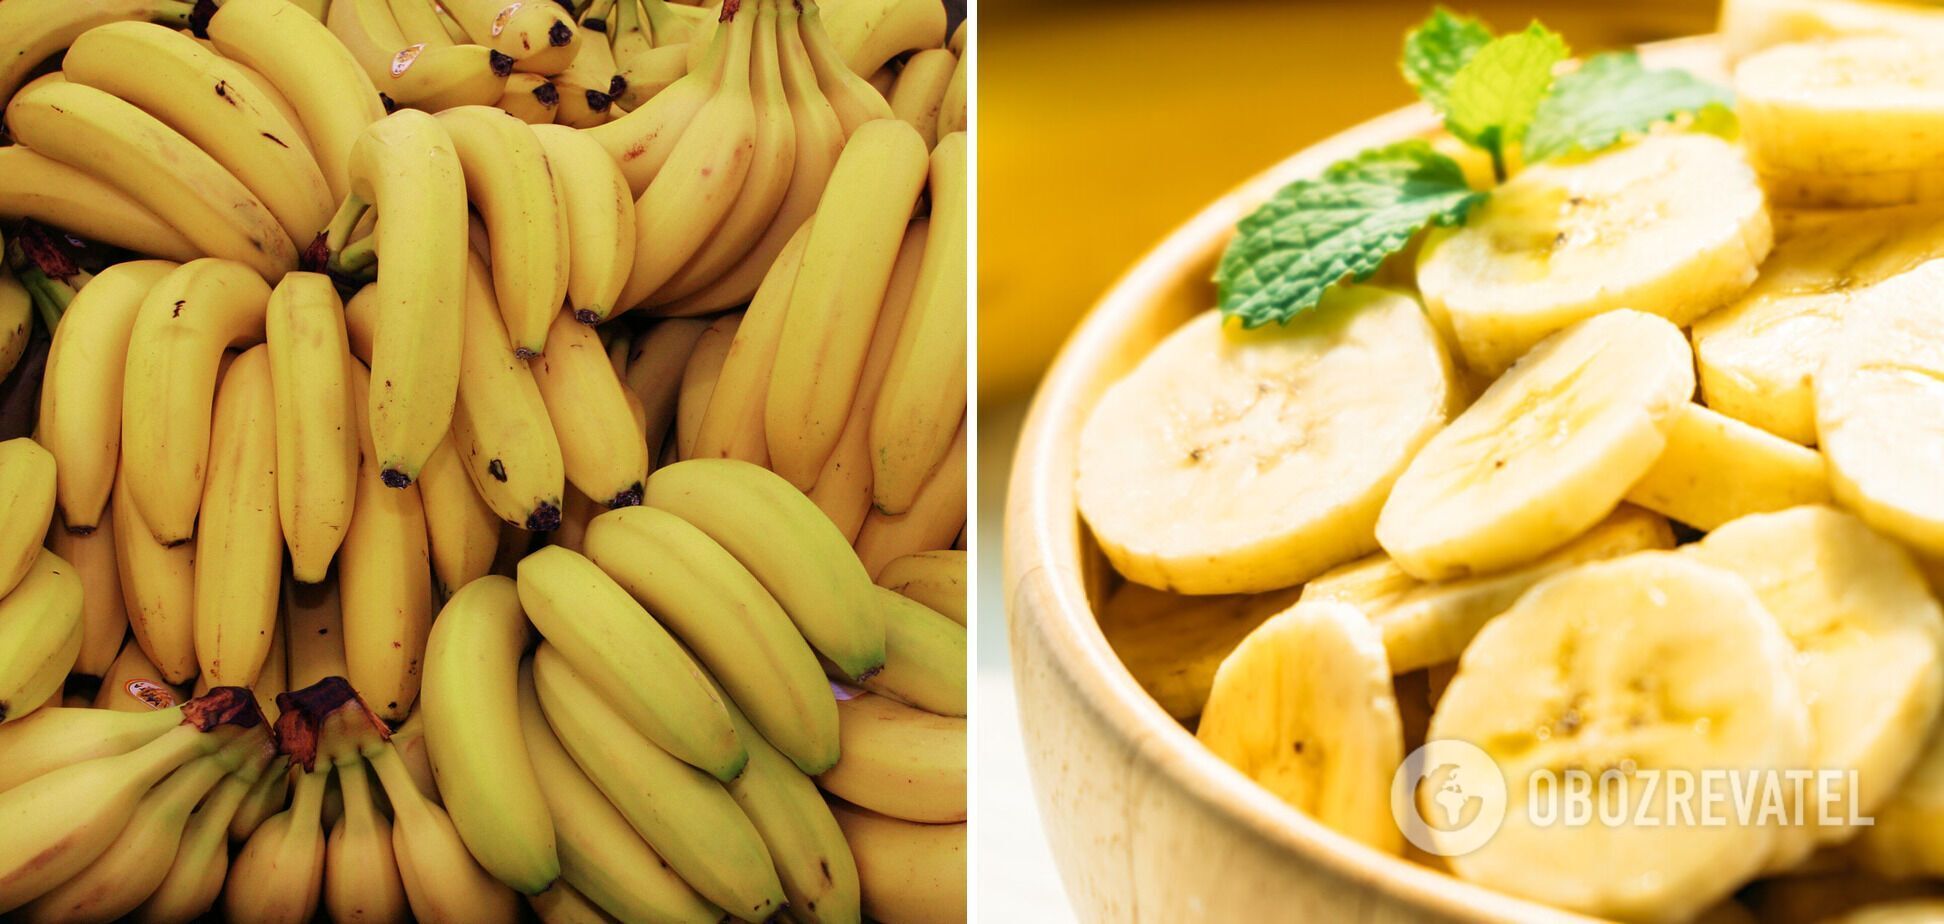 What to make with bananas